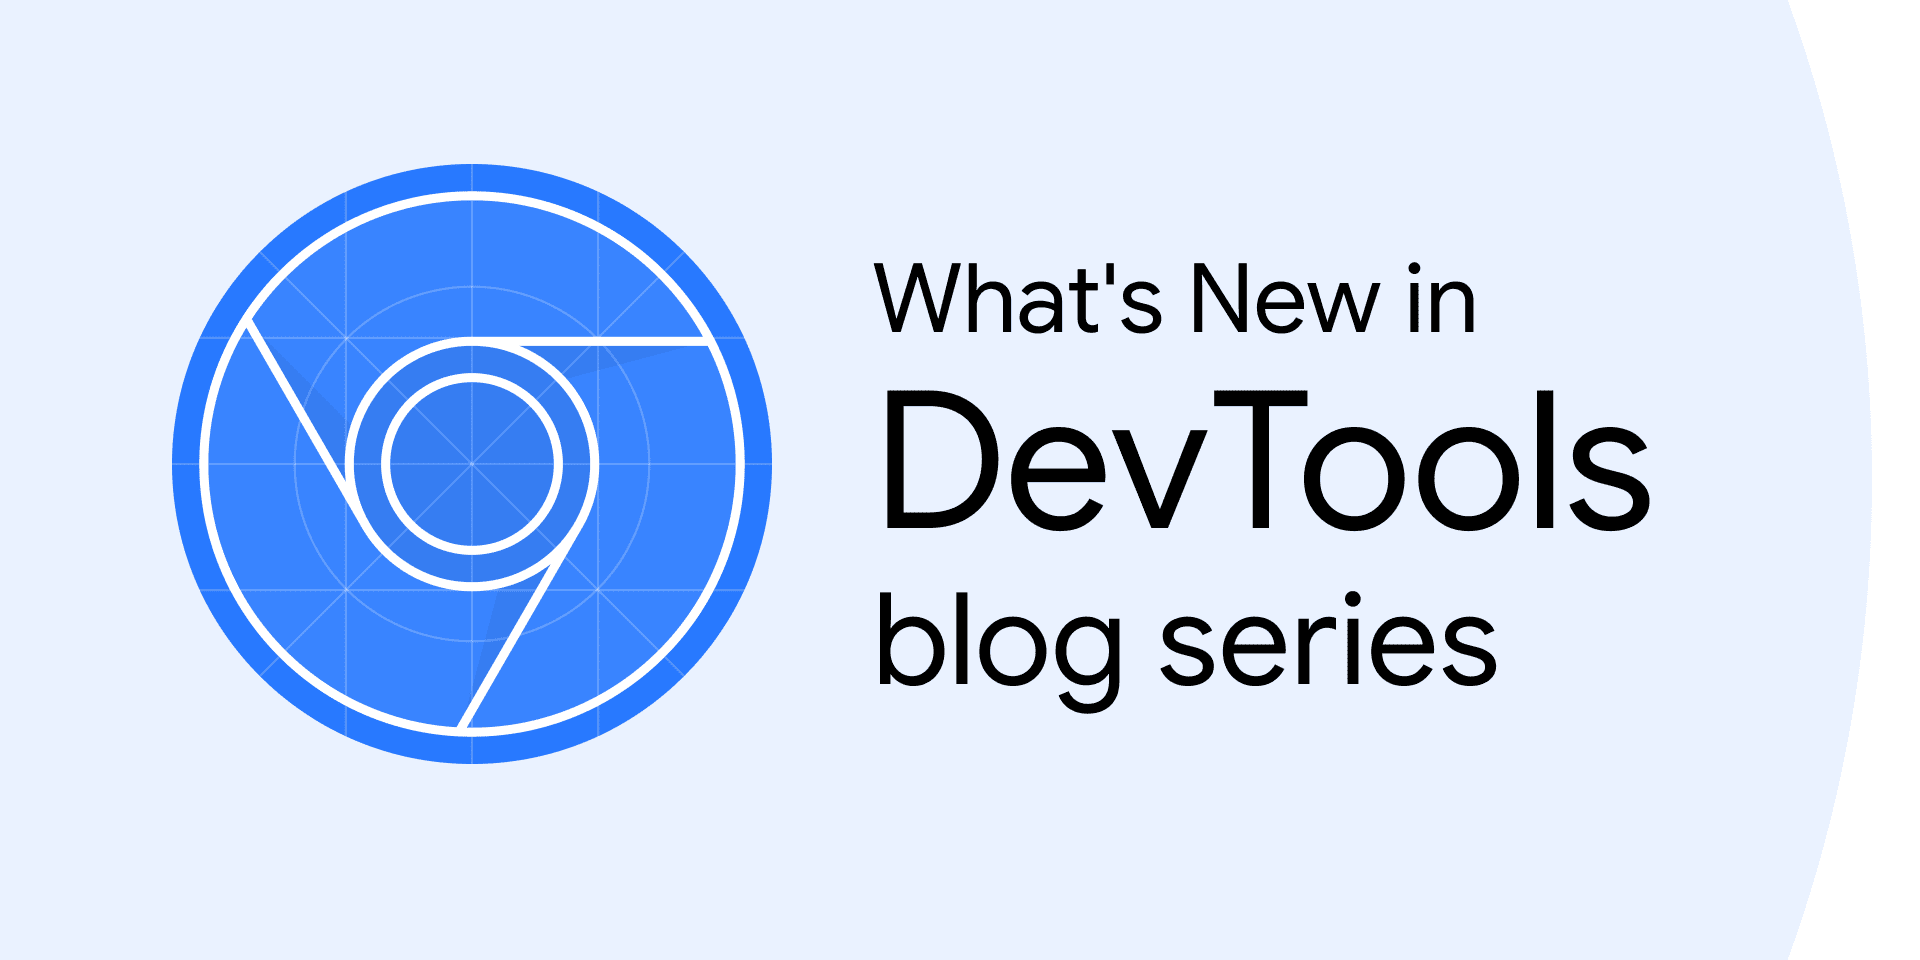 What's New in DevTools.